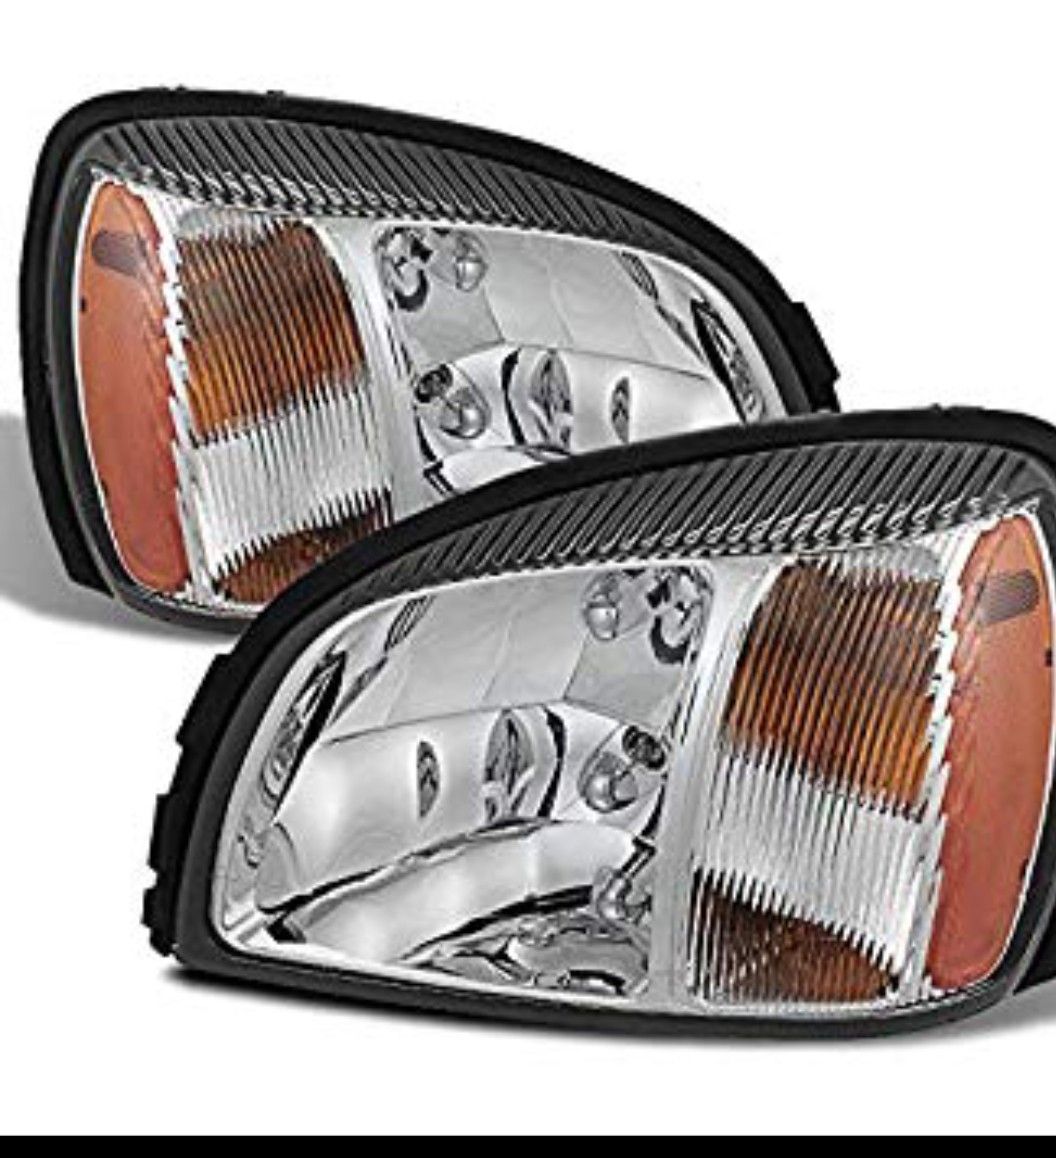 New , Never Installed 2000- 2005 Cadillac Deville Pair Headlights with bulbs